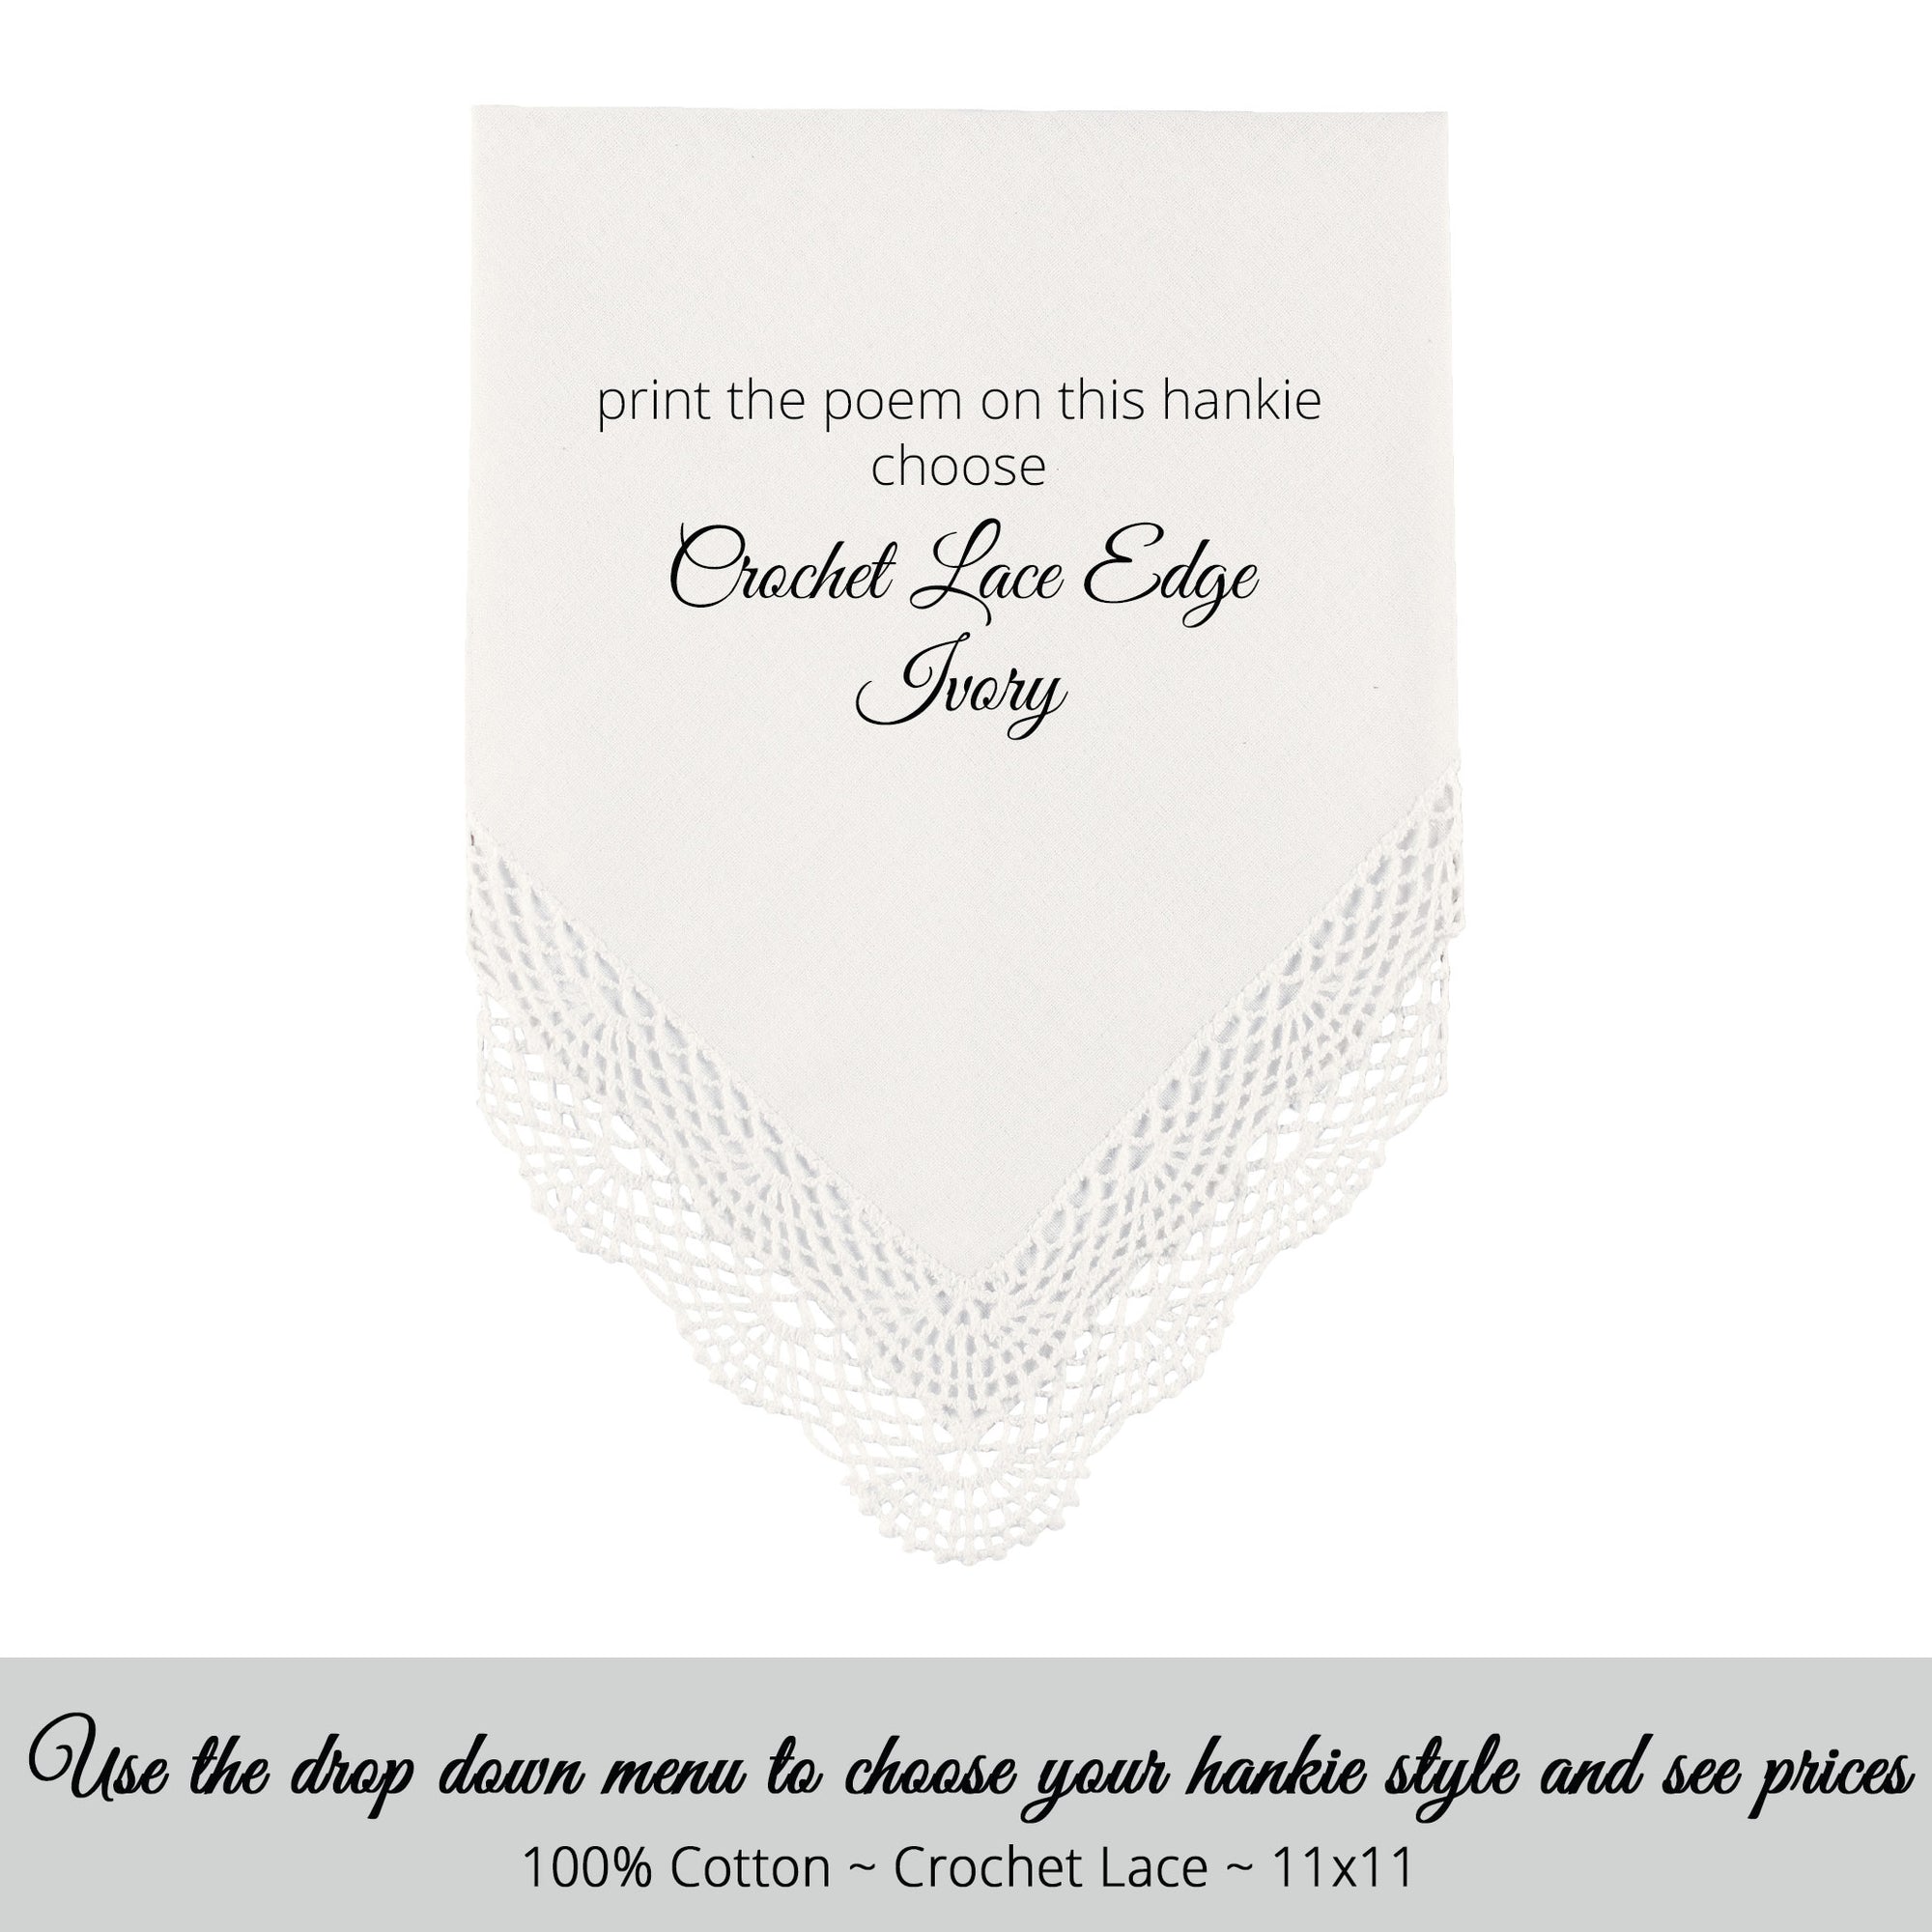 Wedding handkerchief ivory with crochet lace edge for the mother of the bride poem printed hankie